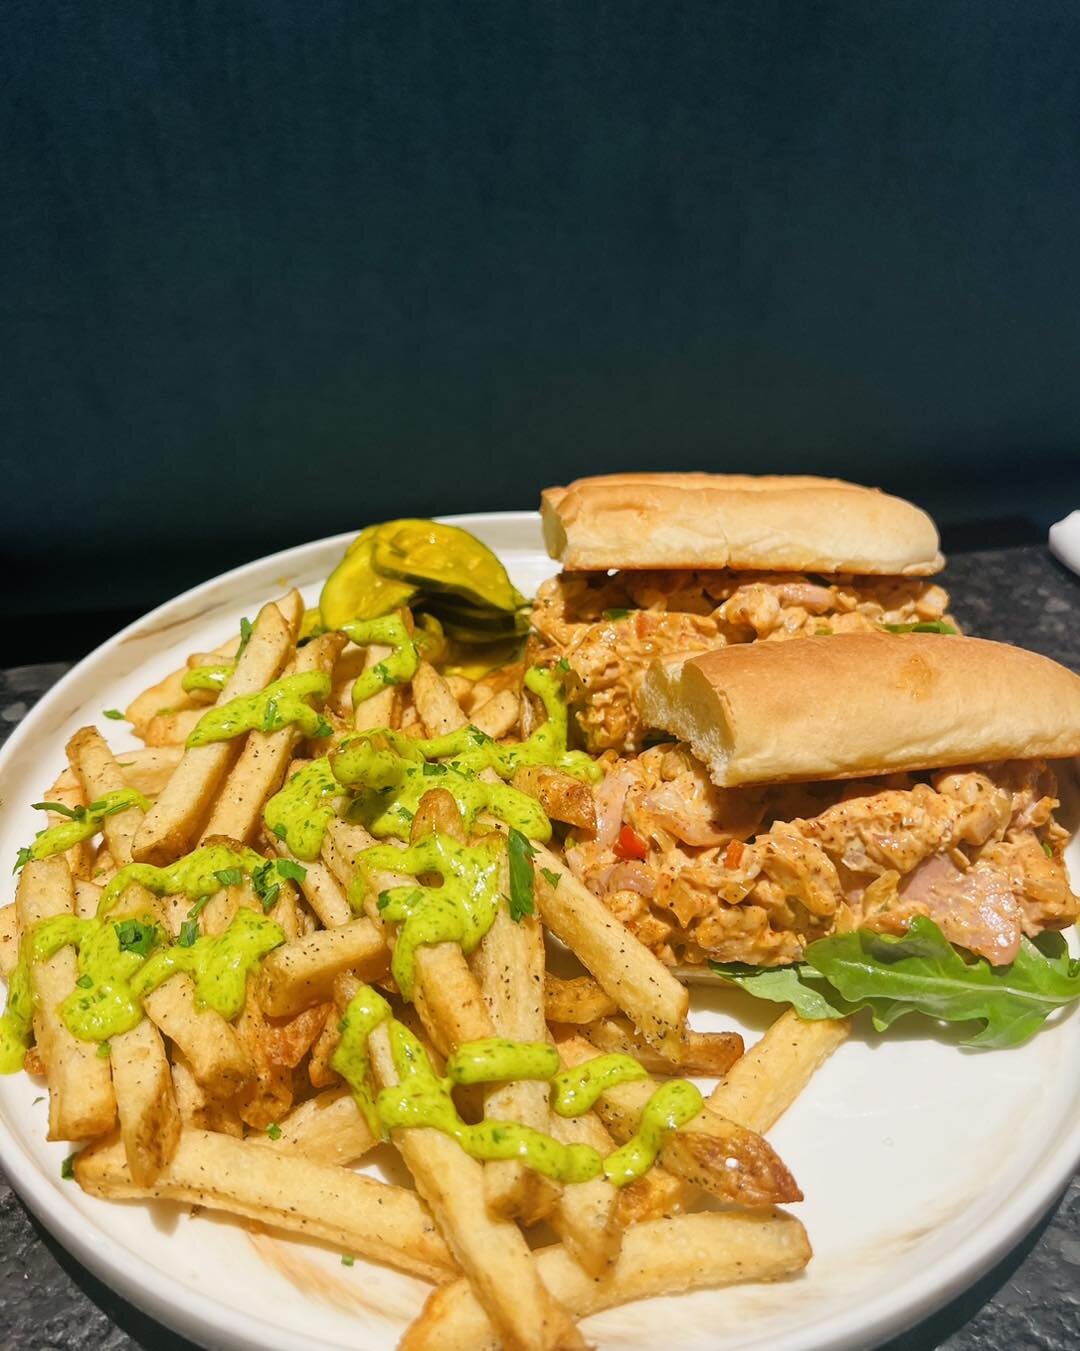 Kicking off the week with a little extra pep in a classic we all love! 😉😋 

👉🏼 Cajun Chicken Salad Sandwich served with fries with a Cajun aioli 

👉🏼 Soup of the Day:Cream of Asparagus
👉🏼 Veggie of the Day: Saut&eacute;ed Broccolini 

🗳️ SIX